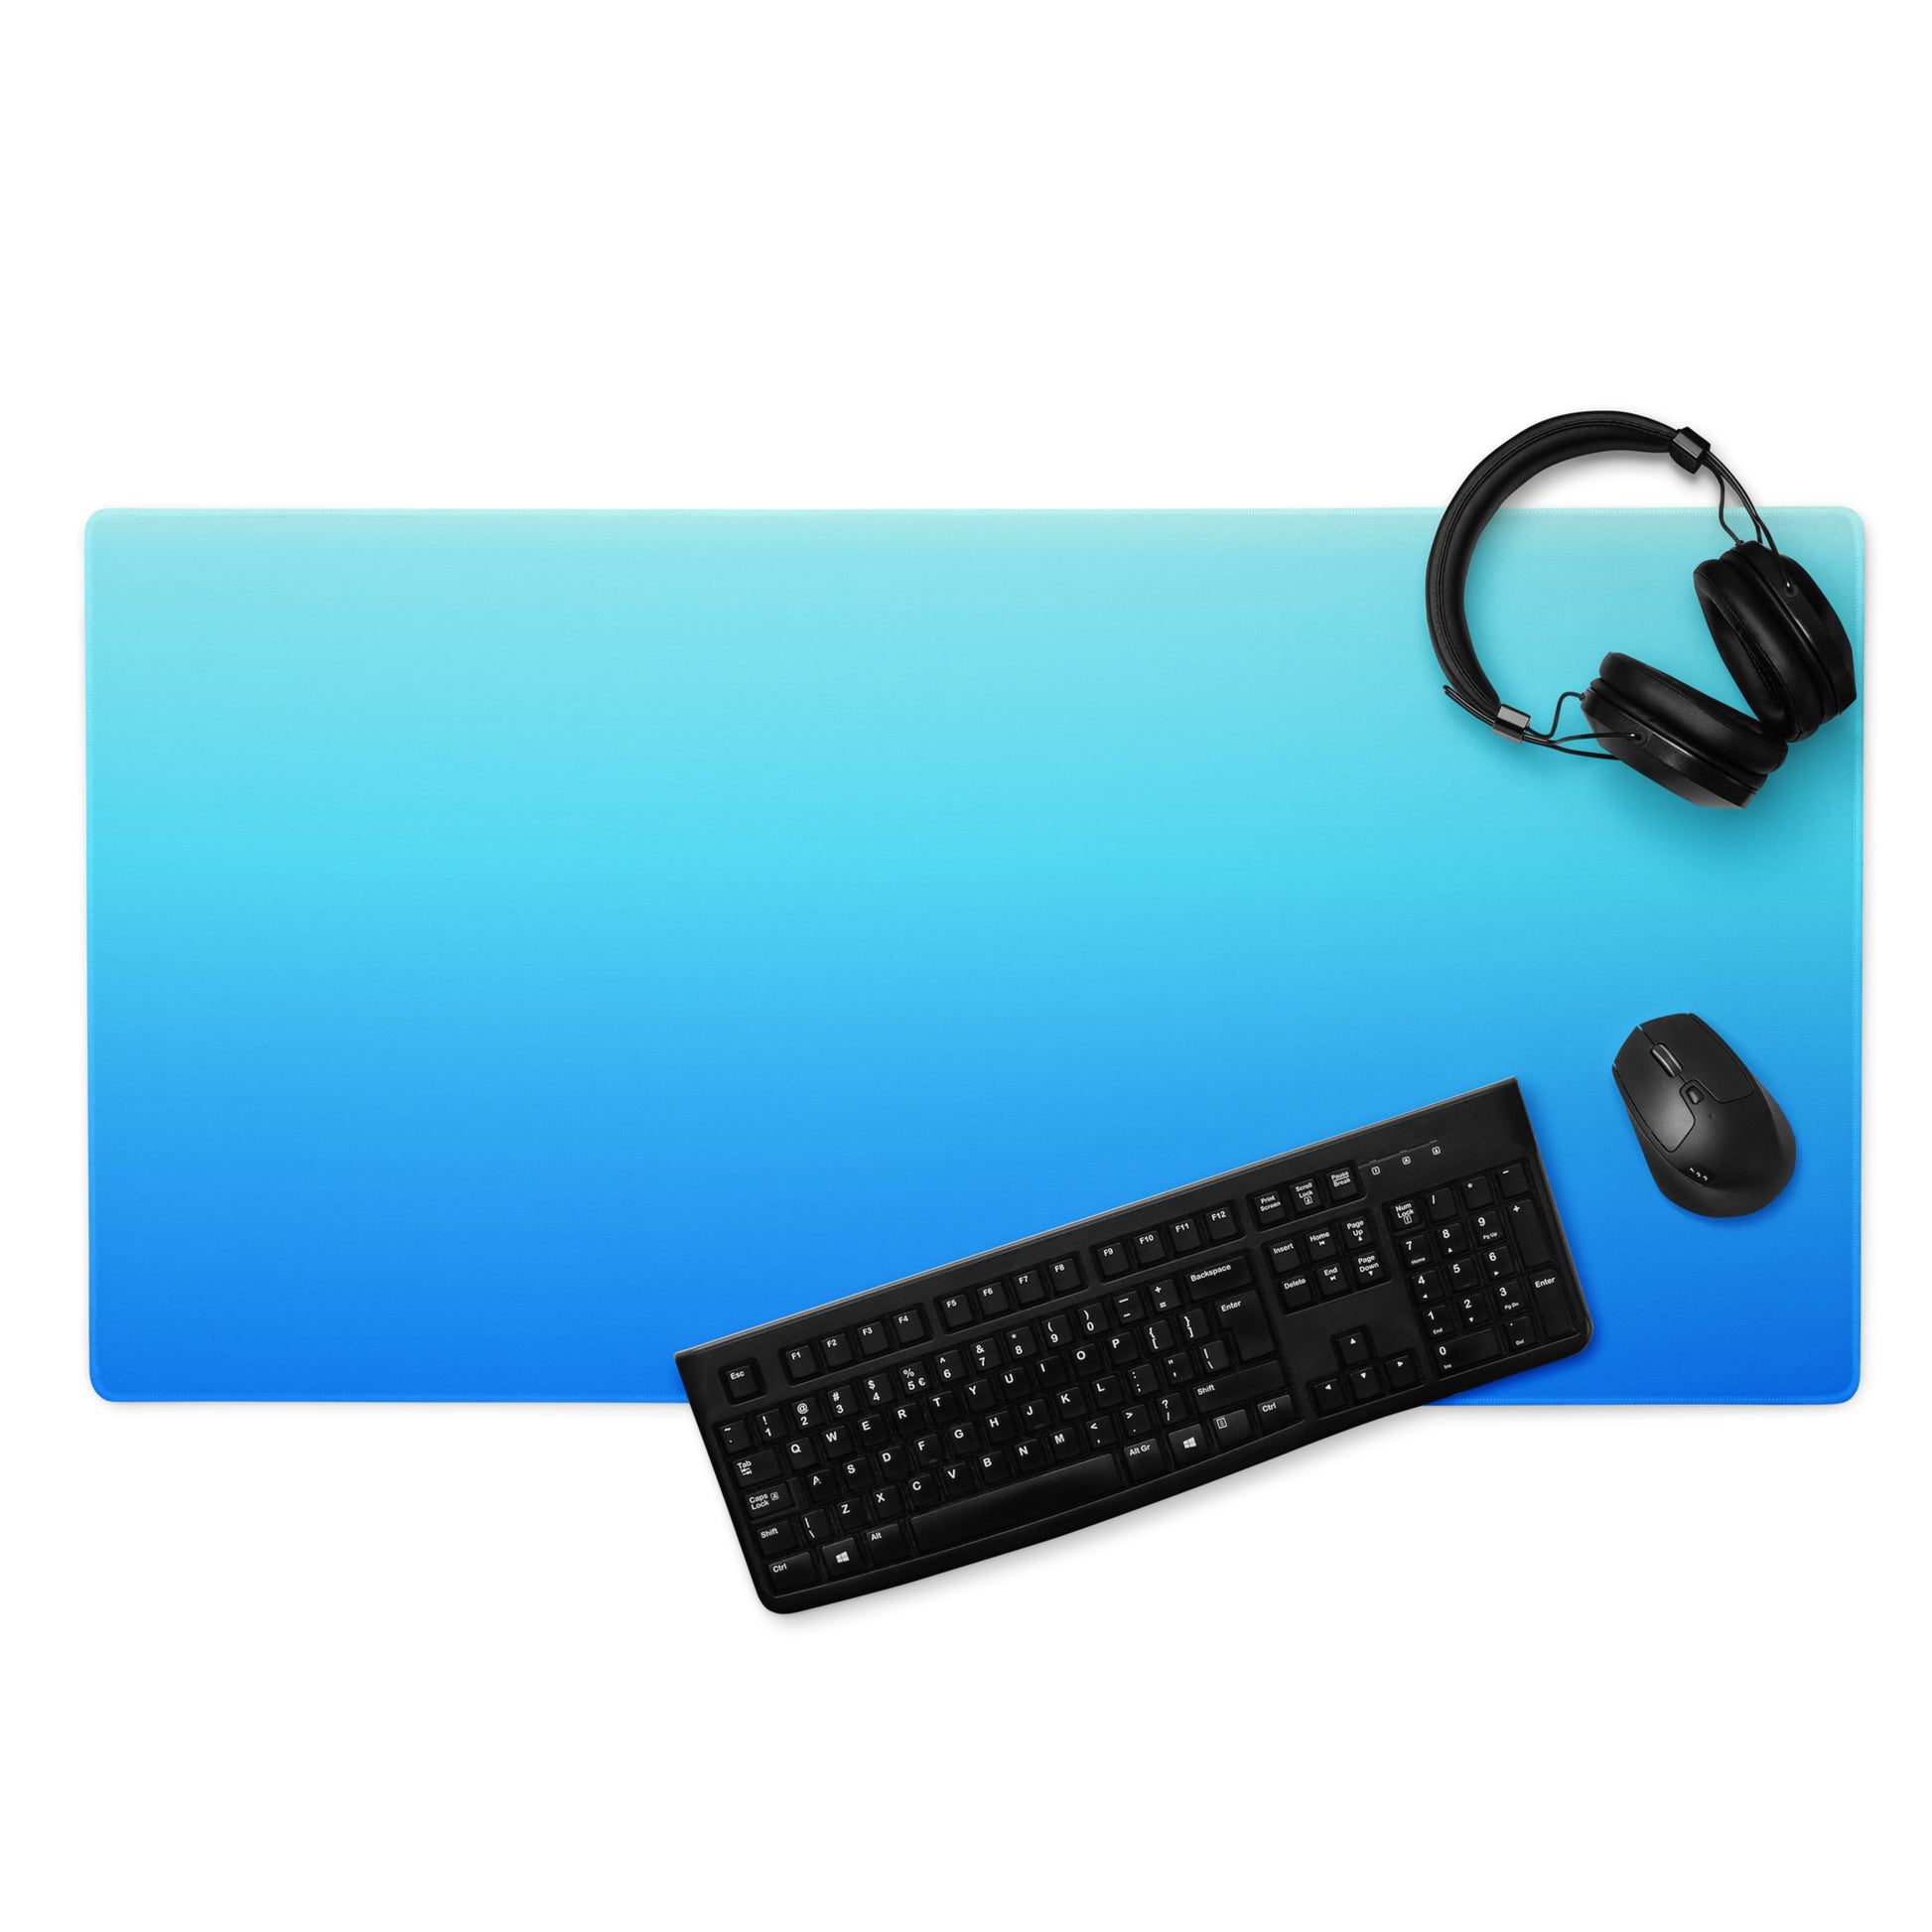 A 36" x 18" gaming desk pad with dark blue at the bottom and light blue at the top. A keyboard, headphones, and mouse sit on top of it.